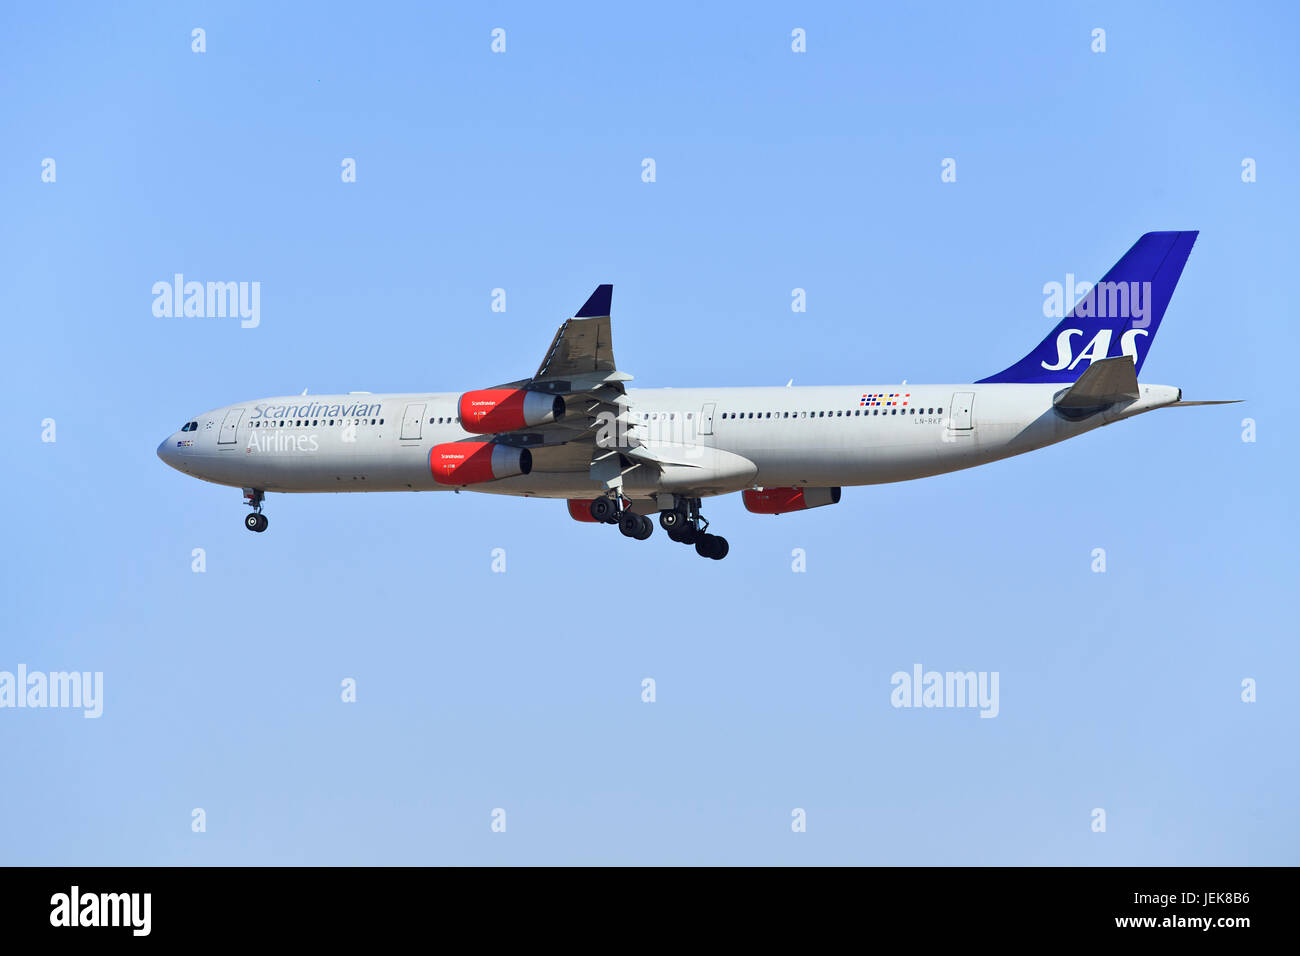 BEIJING-DEC. 9. SAS Airbus A340-313X, LN-RKF landing. Airbus A340 is a long-range four-engine wide-body commercial passenger jet airliner. Stock Photo